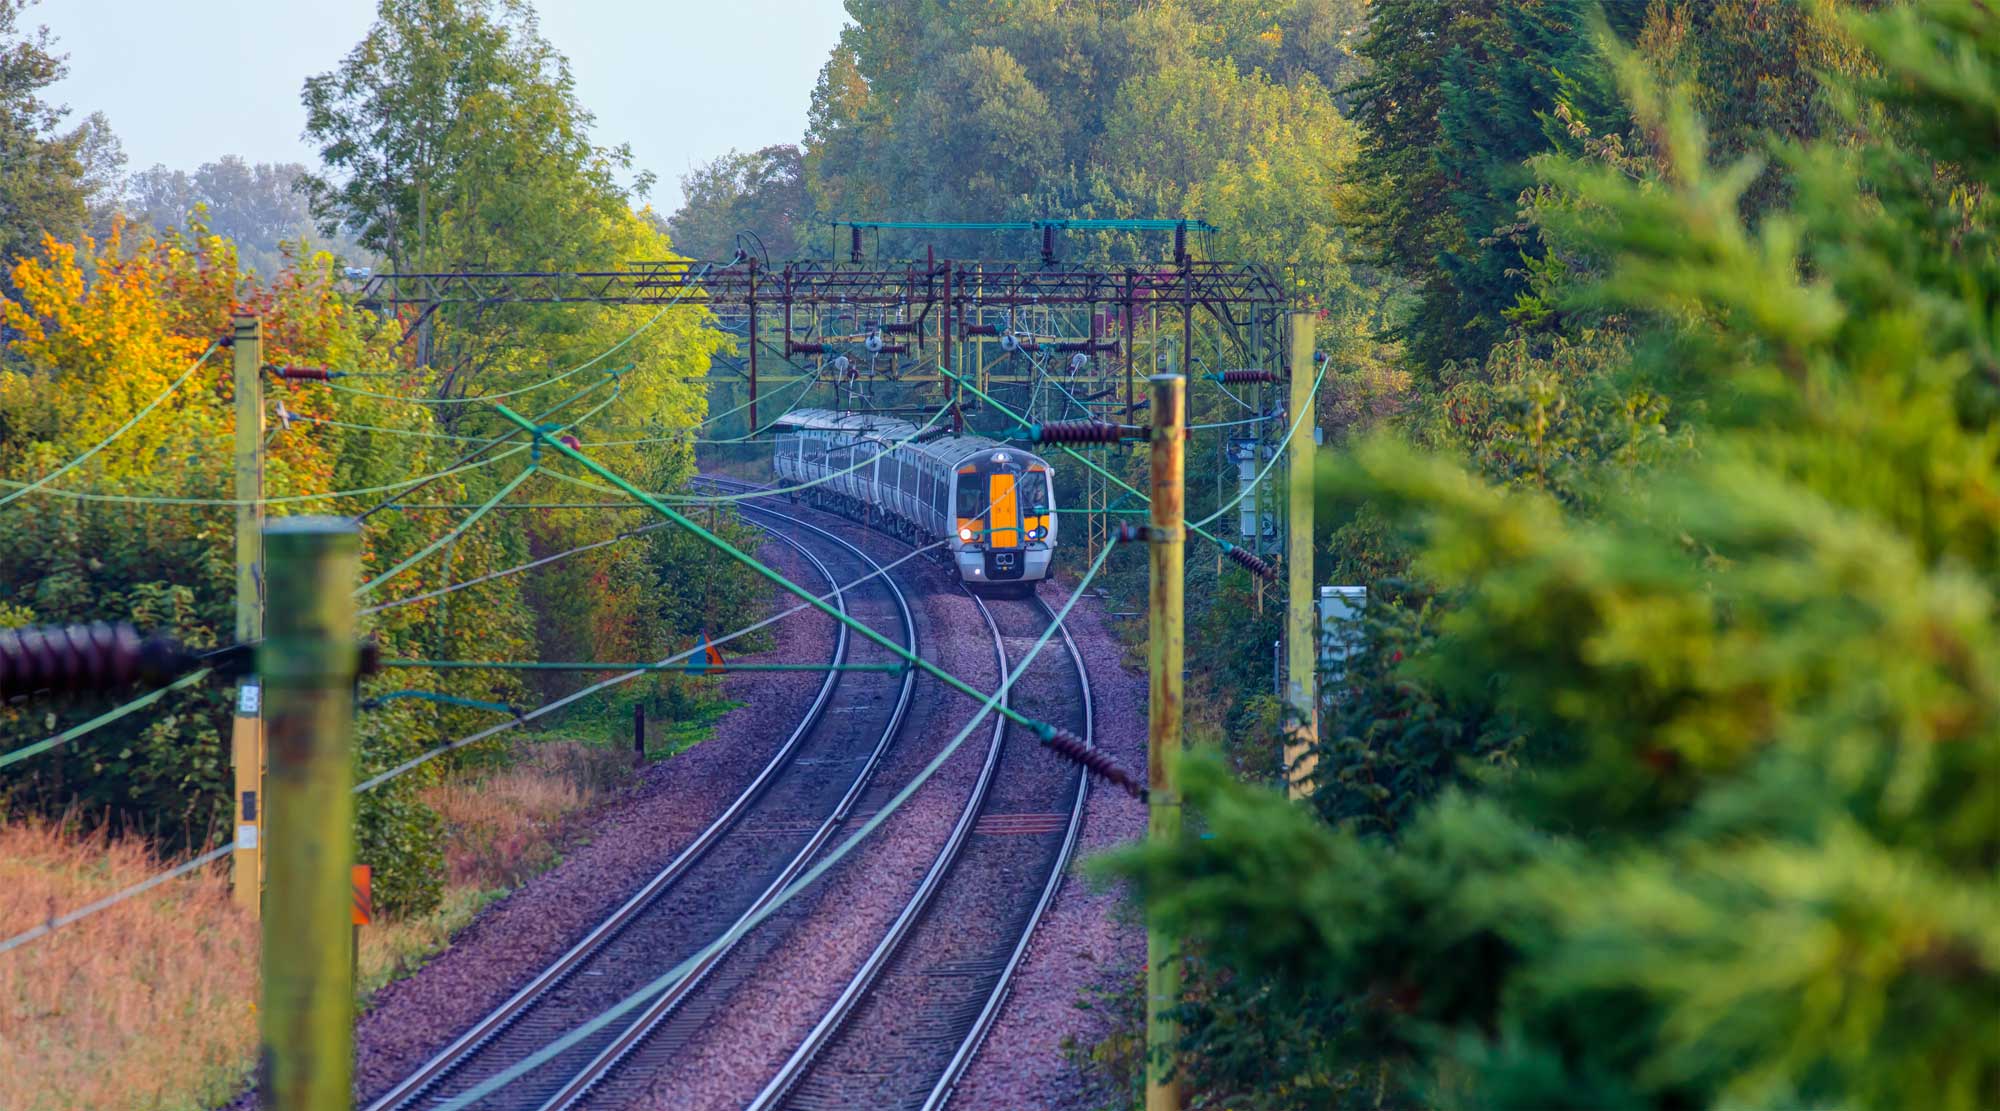 commuter train in motion in London going through the country side during fall